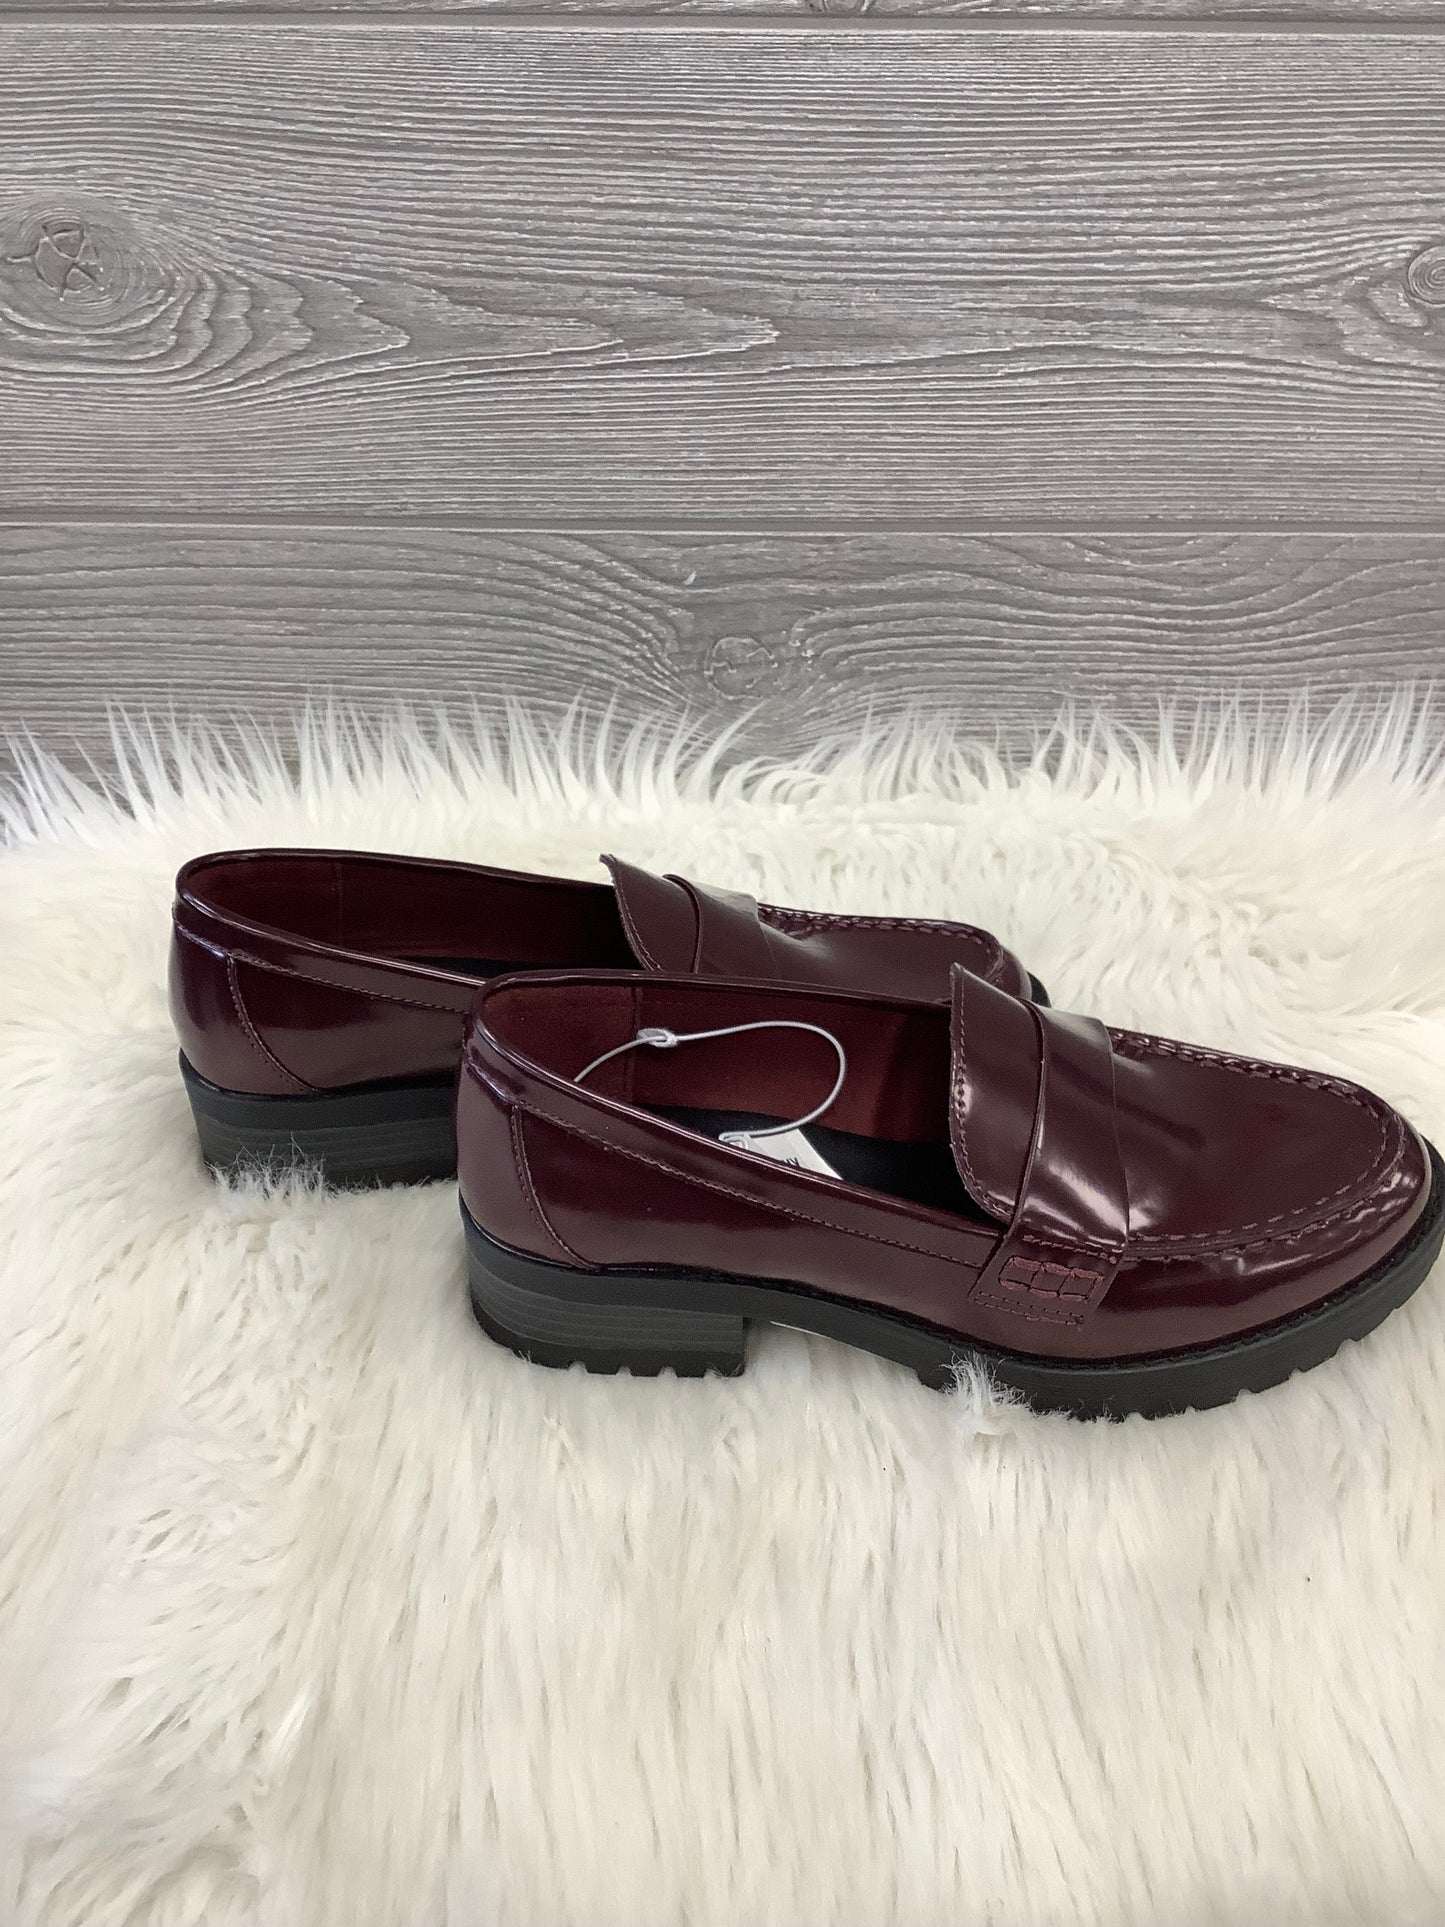 Shoes Heels Loafer Oxford By Old Navy  Size: 8